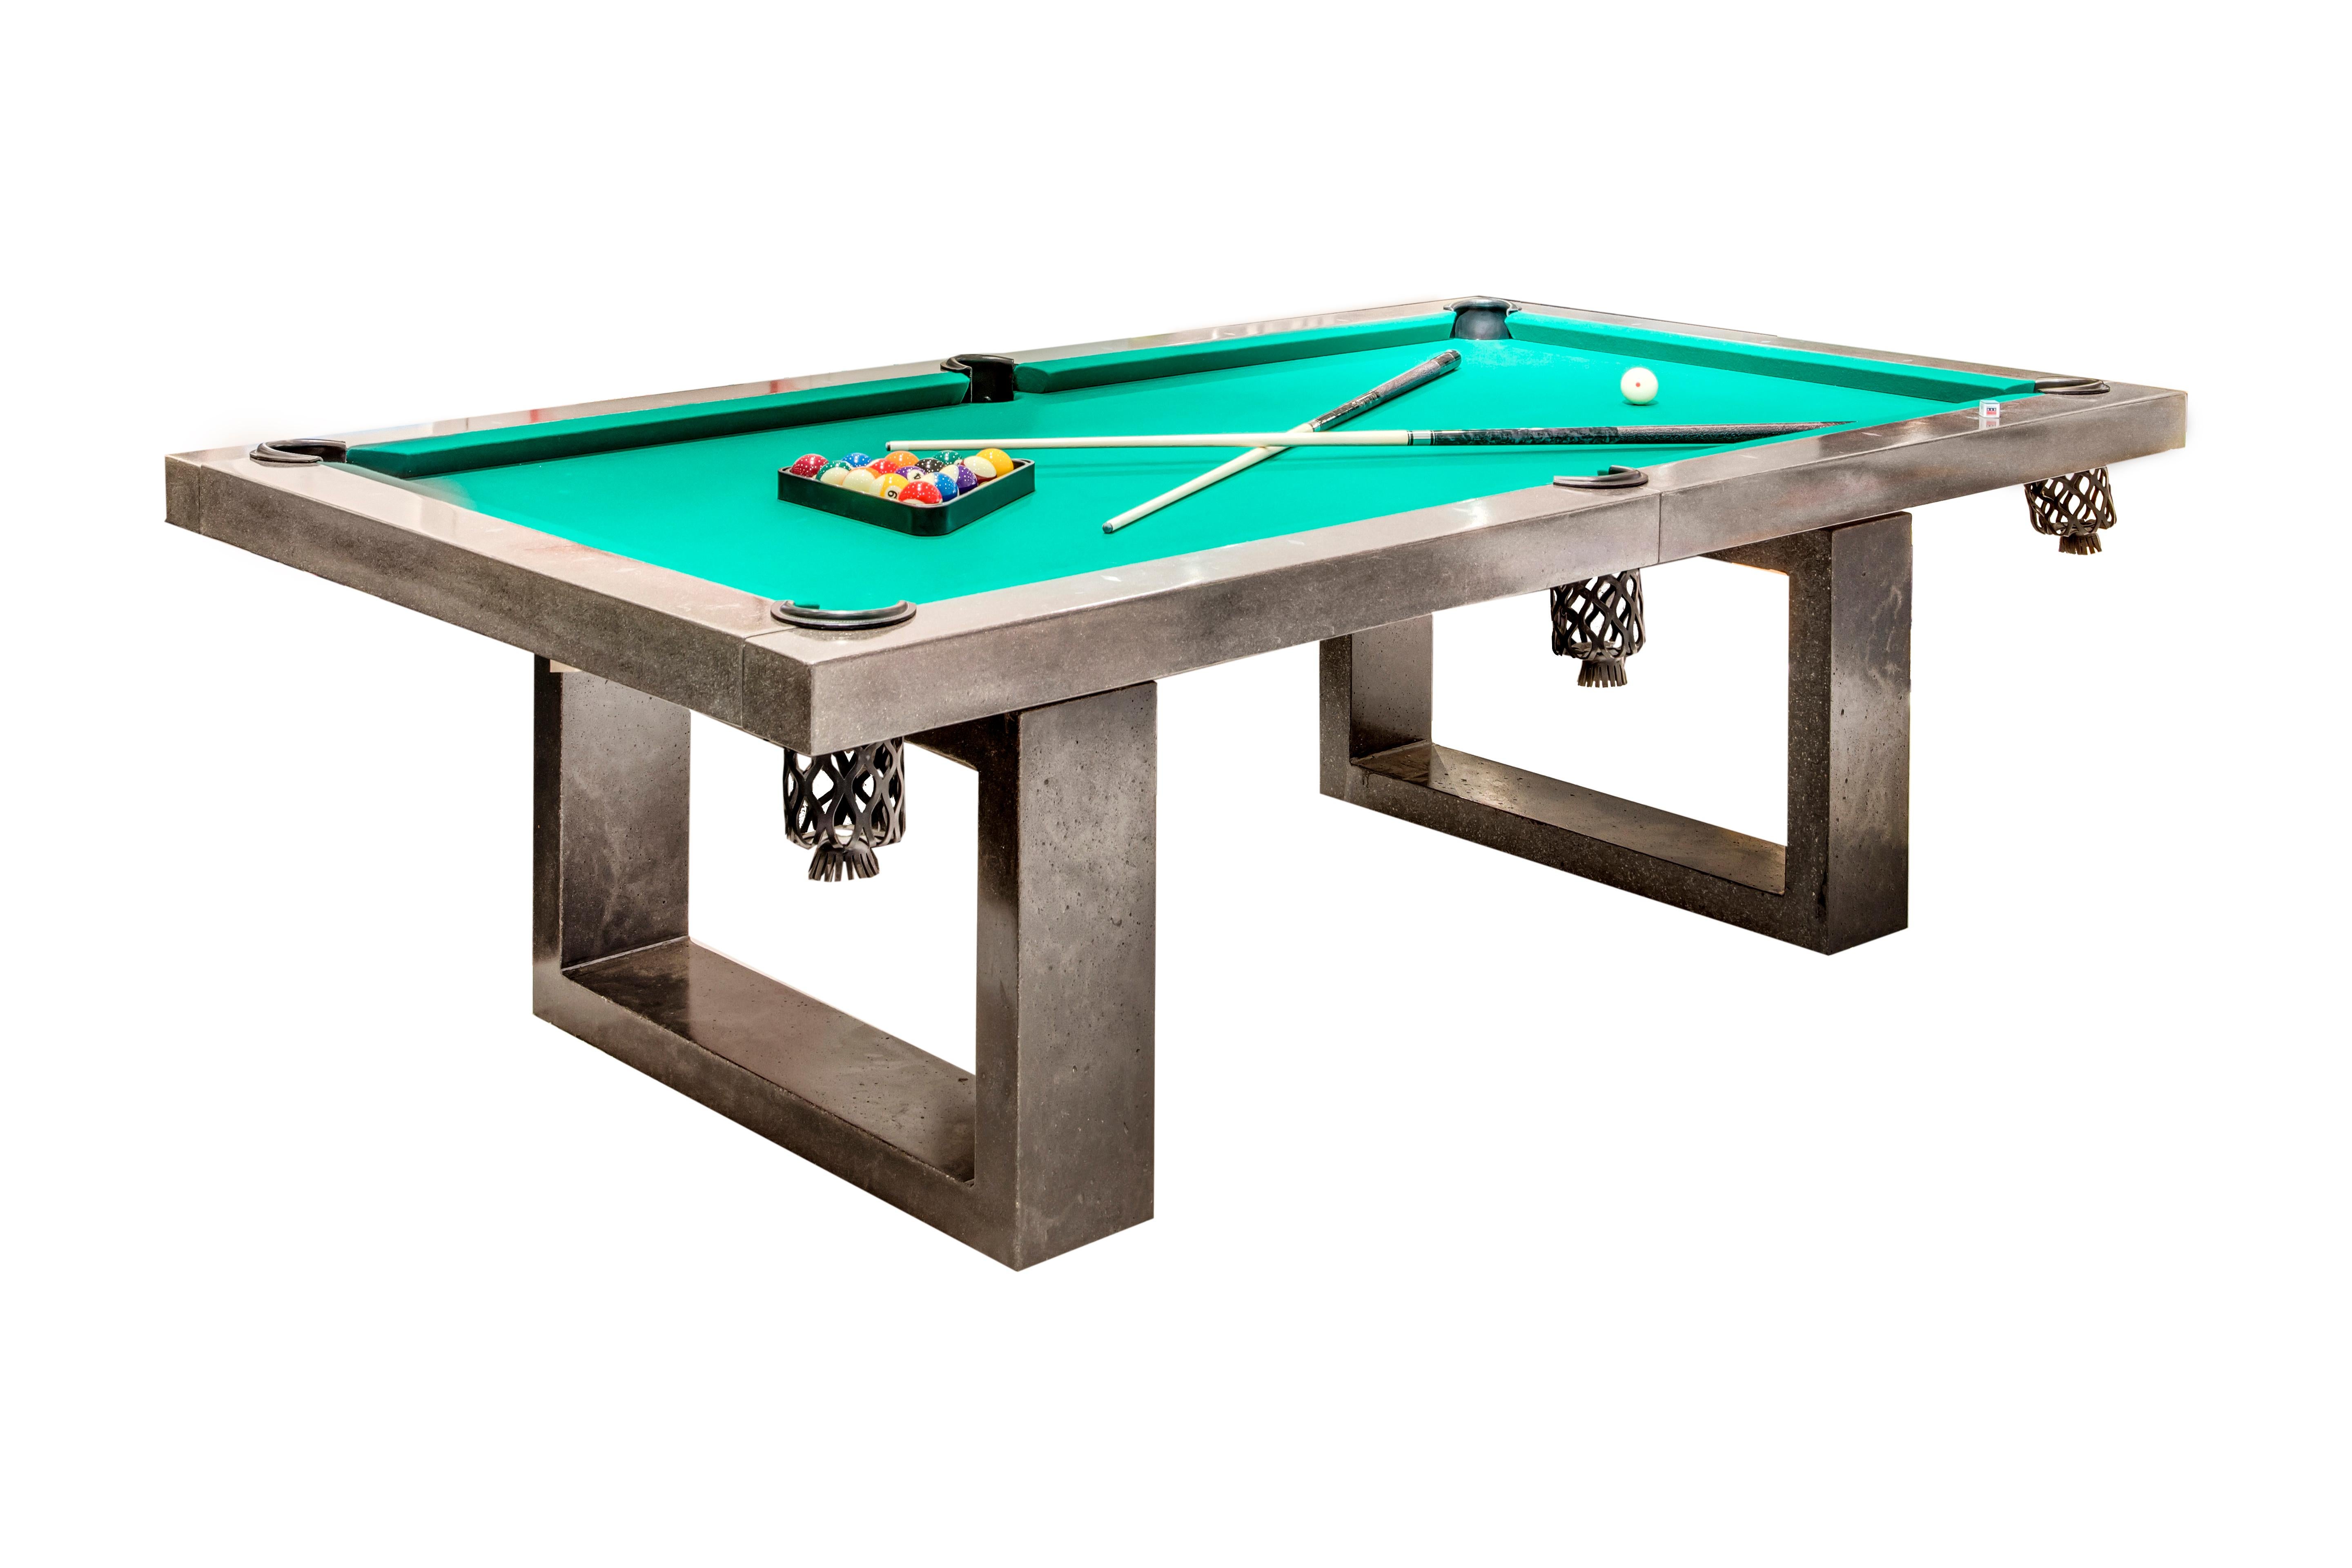 Polished James de Wulf Custom Concrete Pool Table, Available Now For Sale